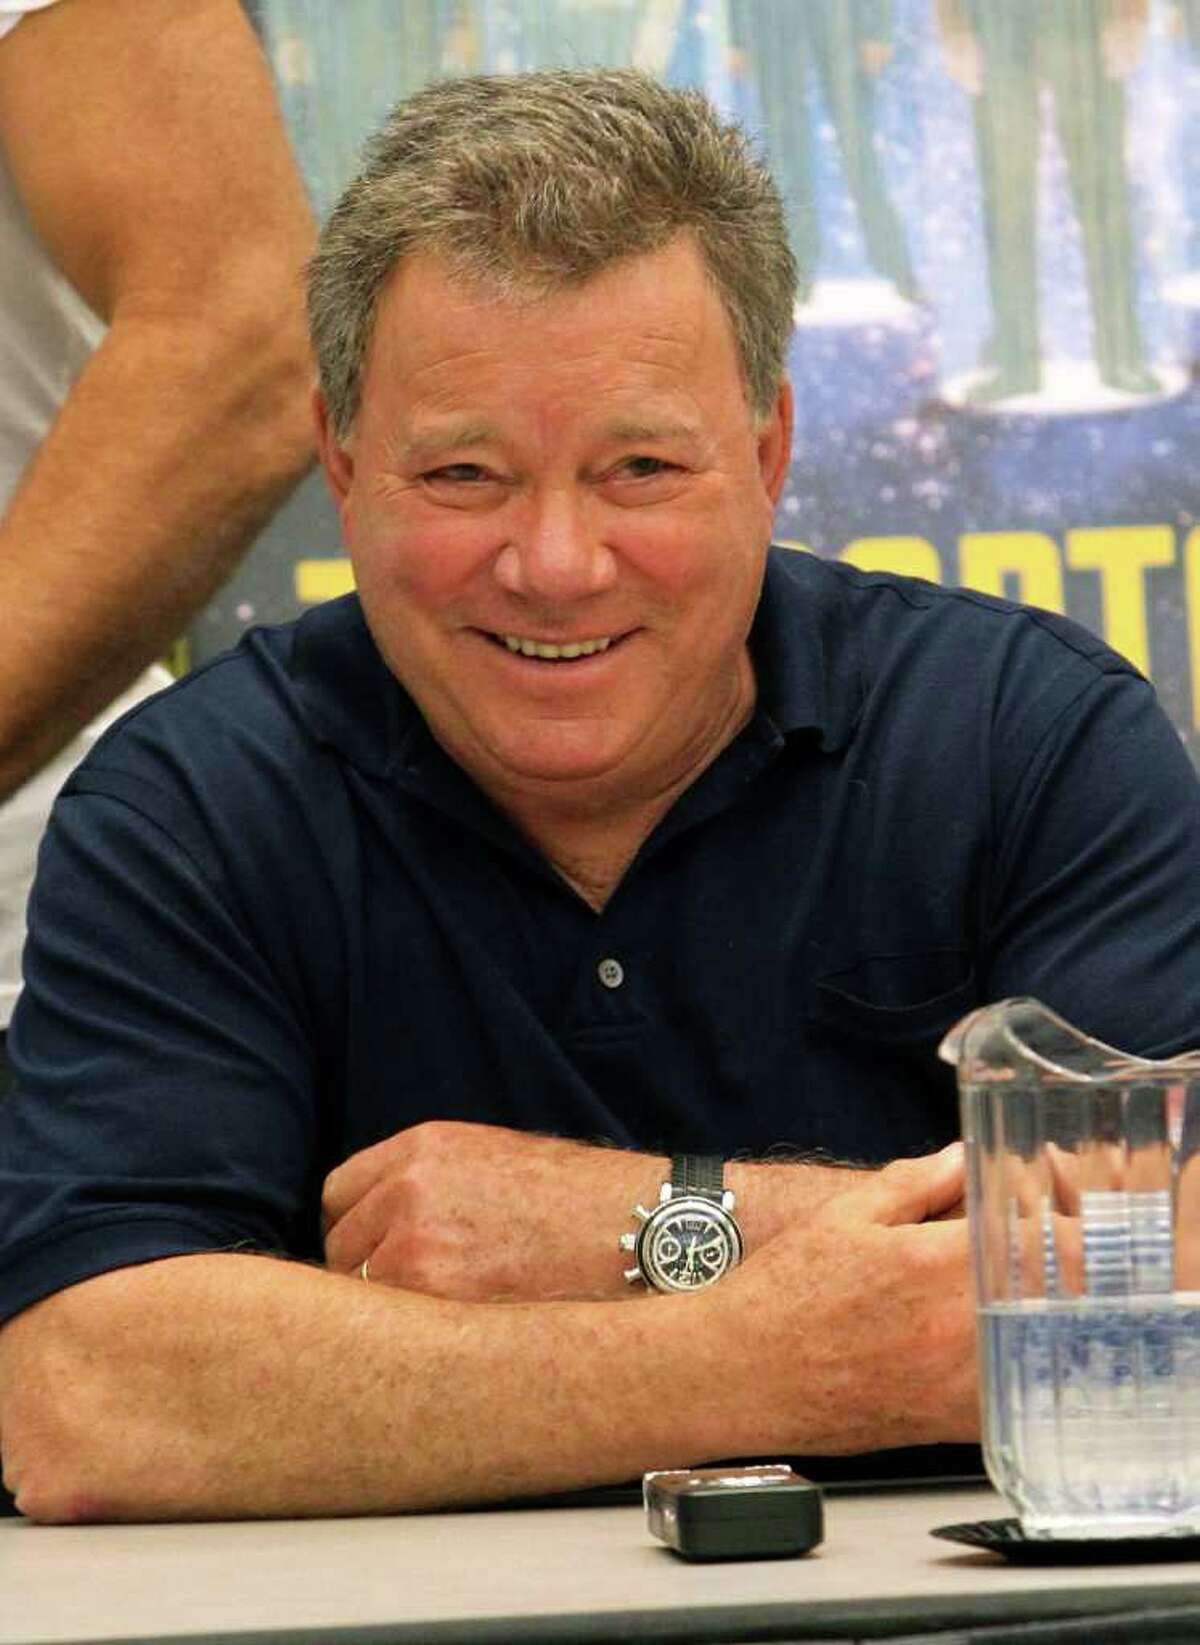 Comic-con continued on Friday, July 22, 2011, with, among other things, the "Shatnerpalooza" Press Conference, featuring original "Star Trek" Capt. James T. Kirk actor William Shatner.